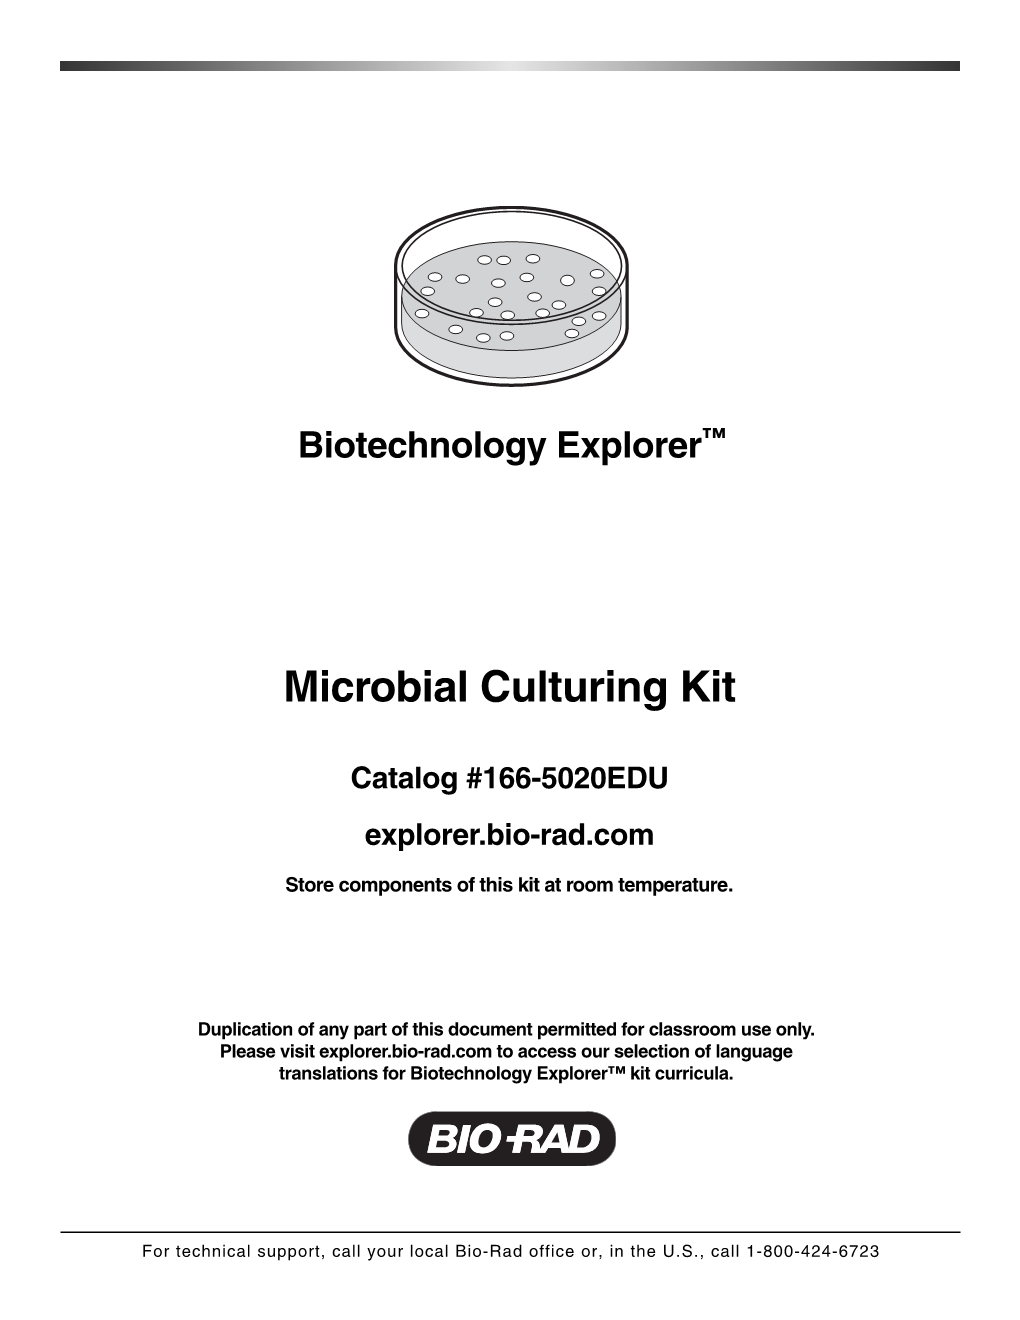 Microbial Culturing Kit